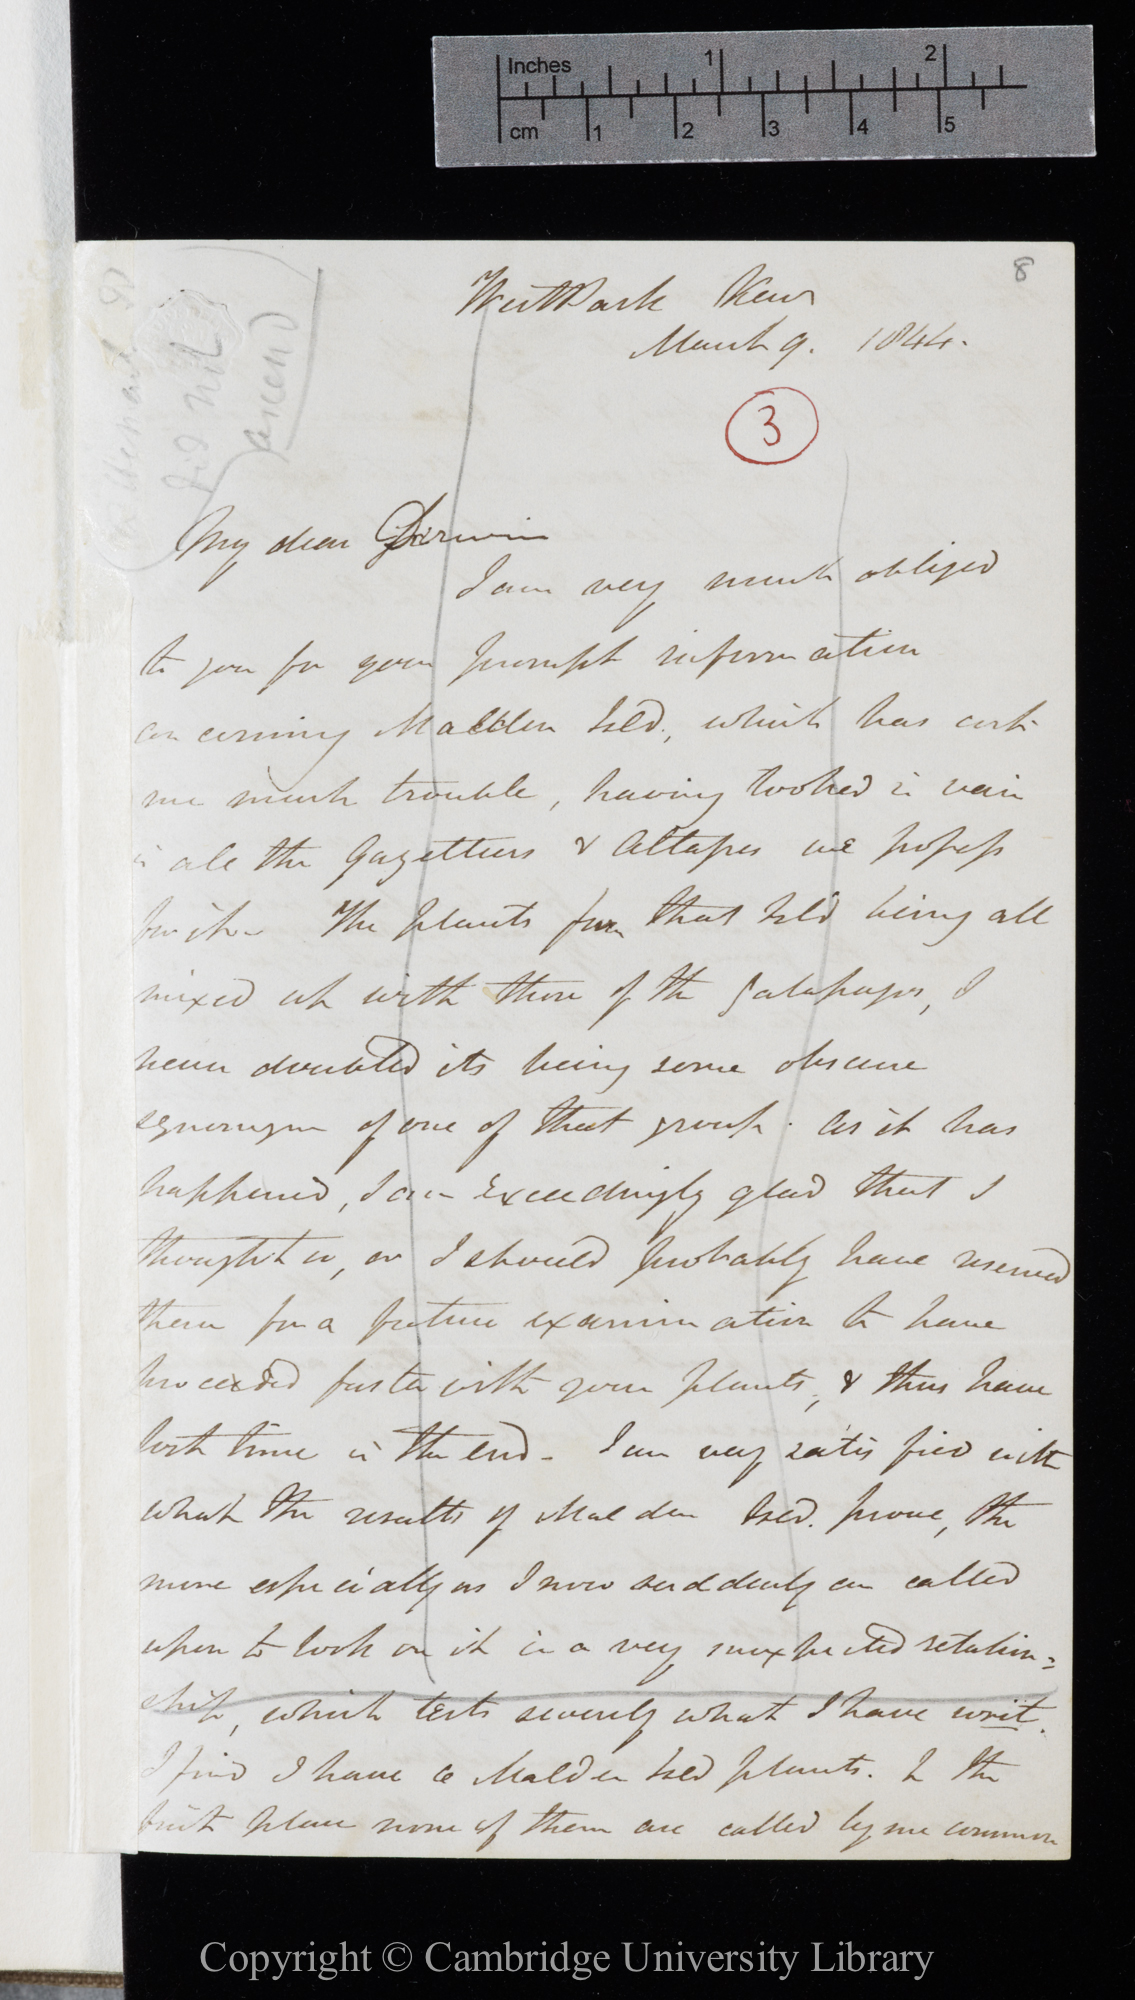 Letter from J. D. Hooker to C. R. Darwin   9 March 1844